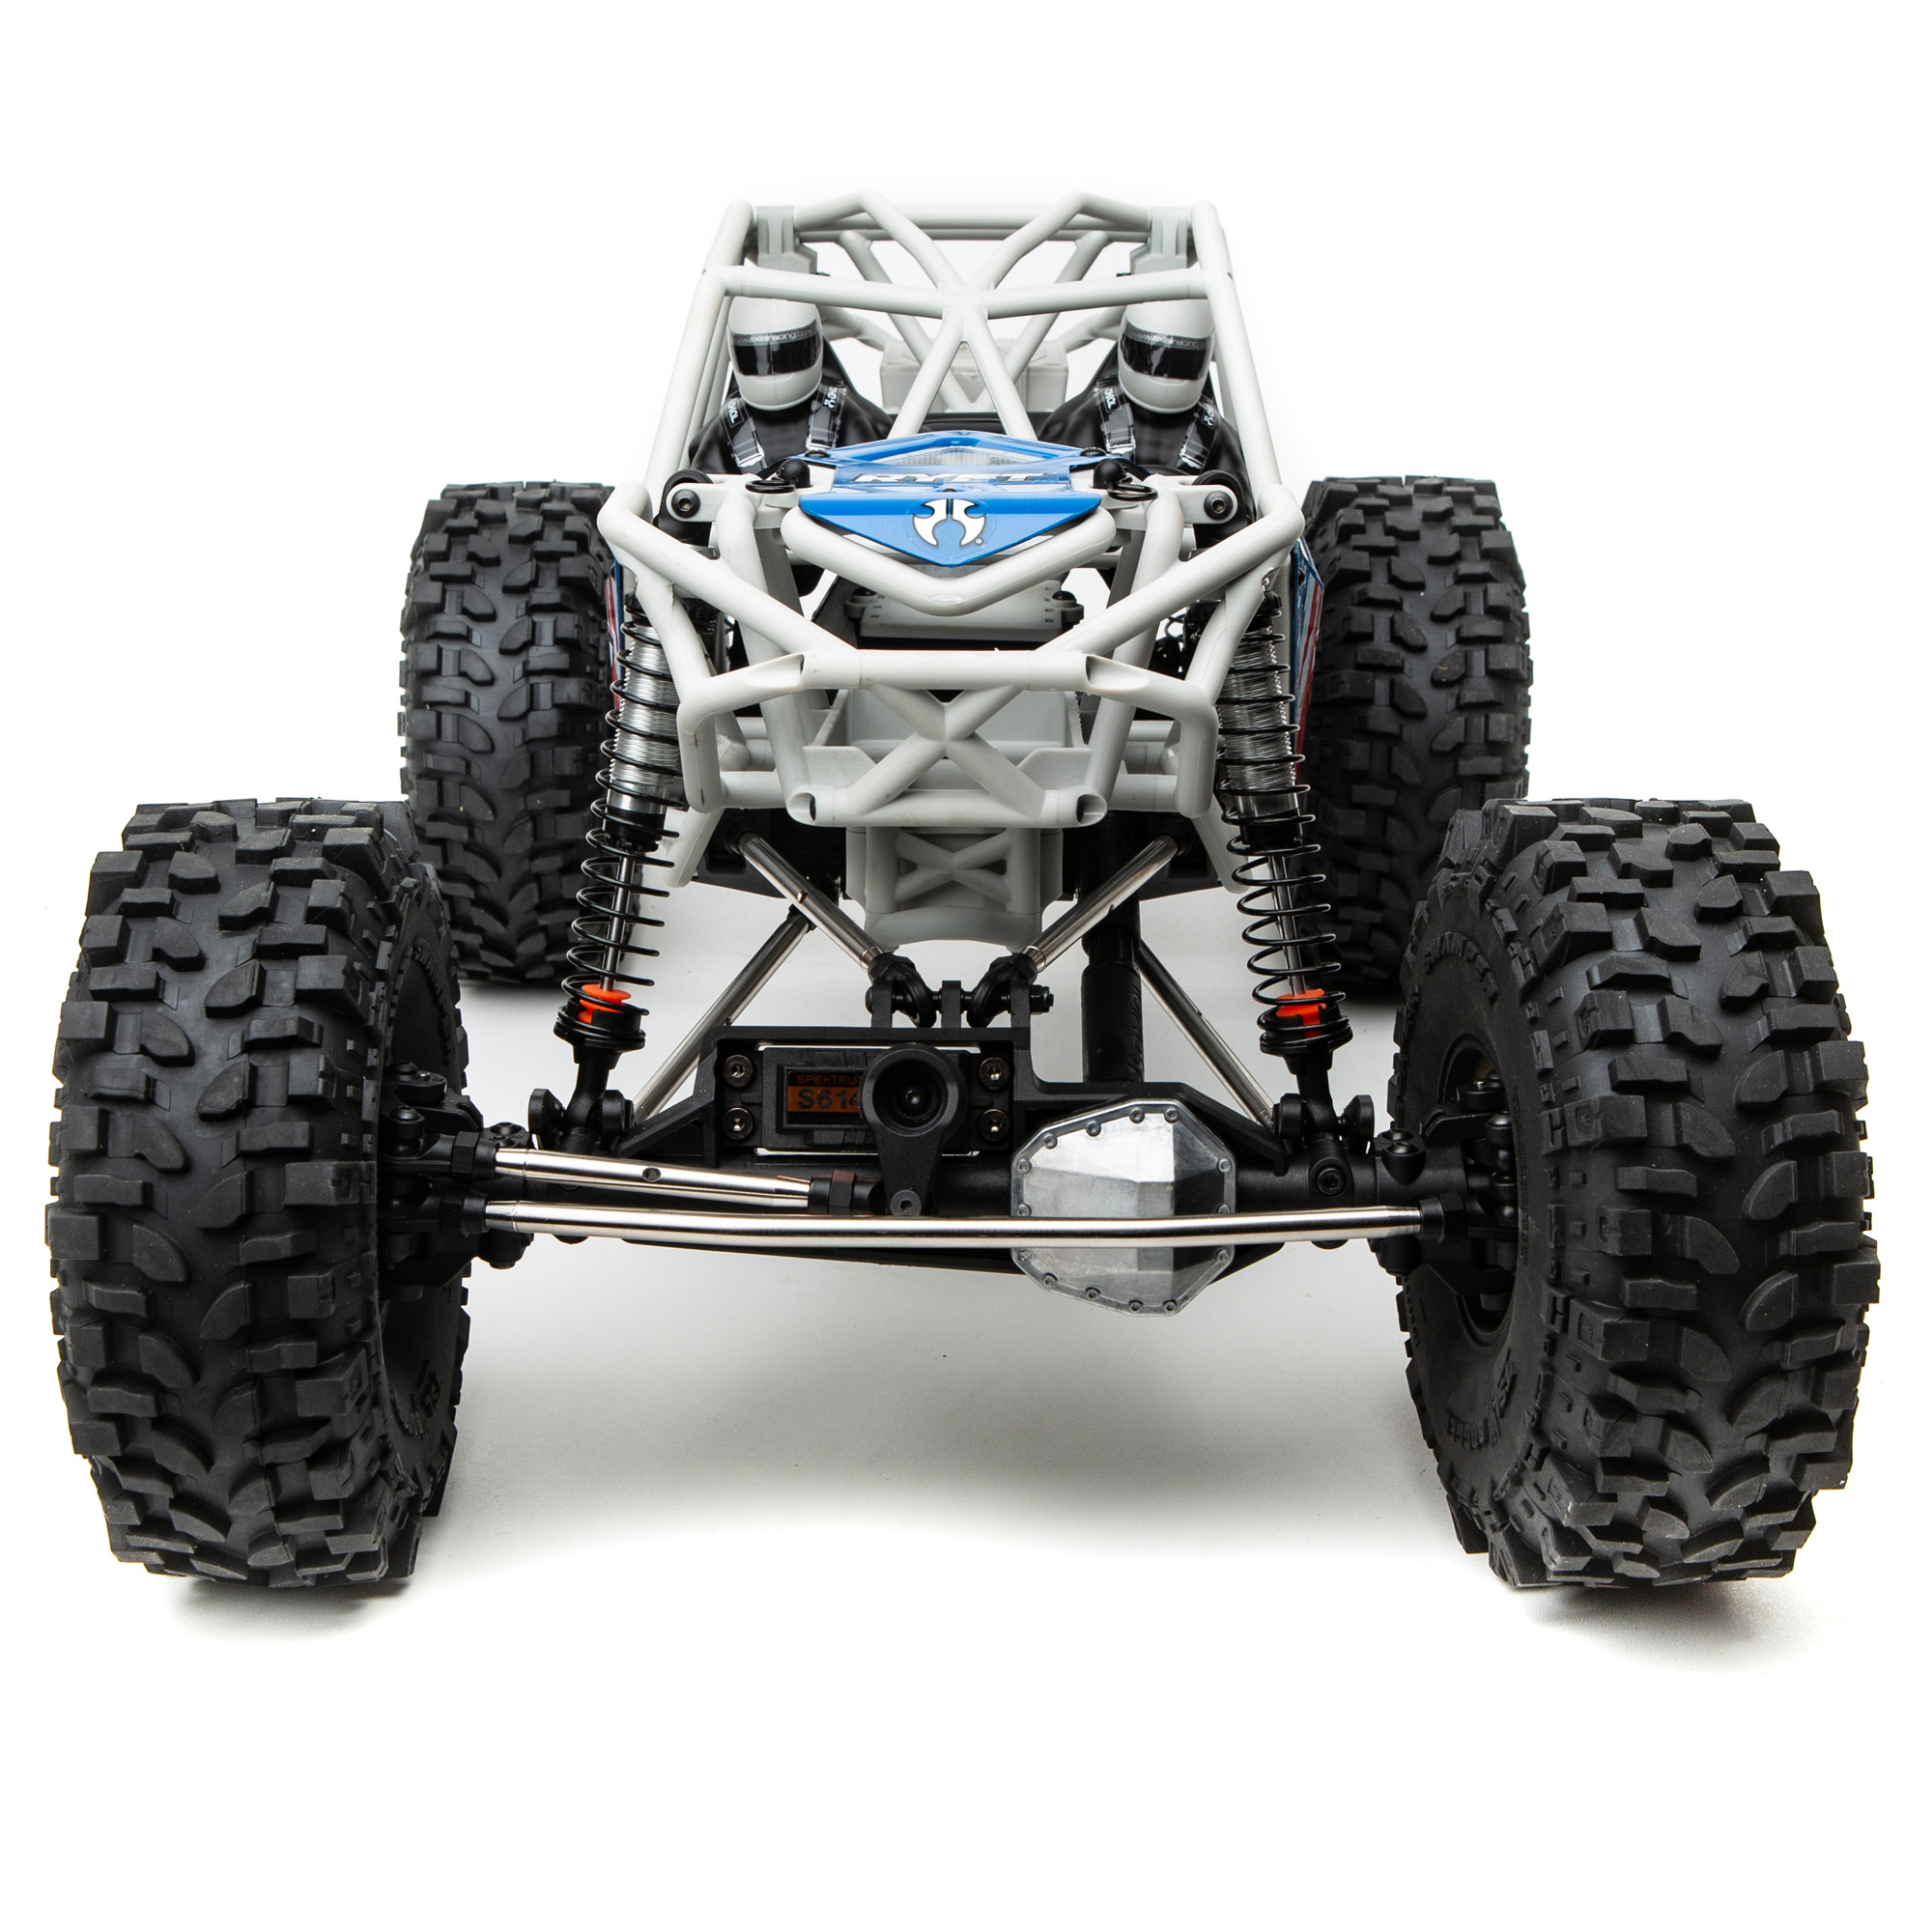 Axial RC Truck 1/10 RBX10 Ryft 4 Wheel Drive Rock Bouncer Kit Gray AXI03009 Trucks Elec Kit 1/10 Off-Road - image 4 of 11